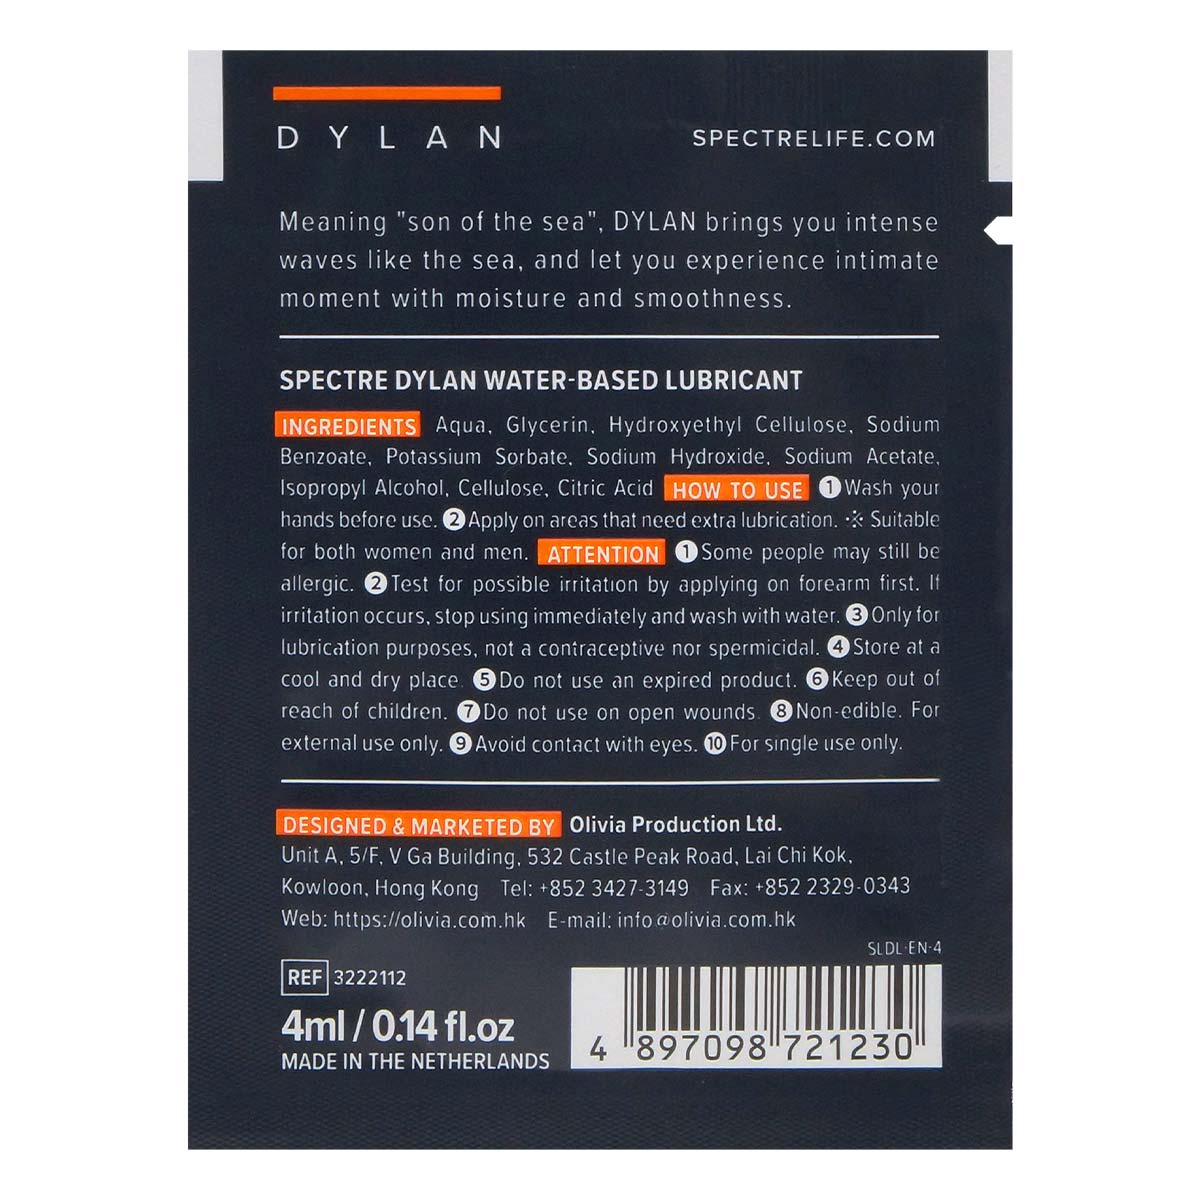 Spectre DYLAN water-based lubricant 4ml -p_3